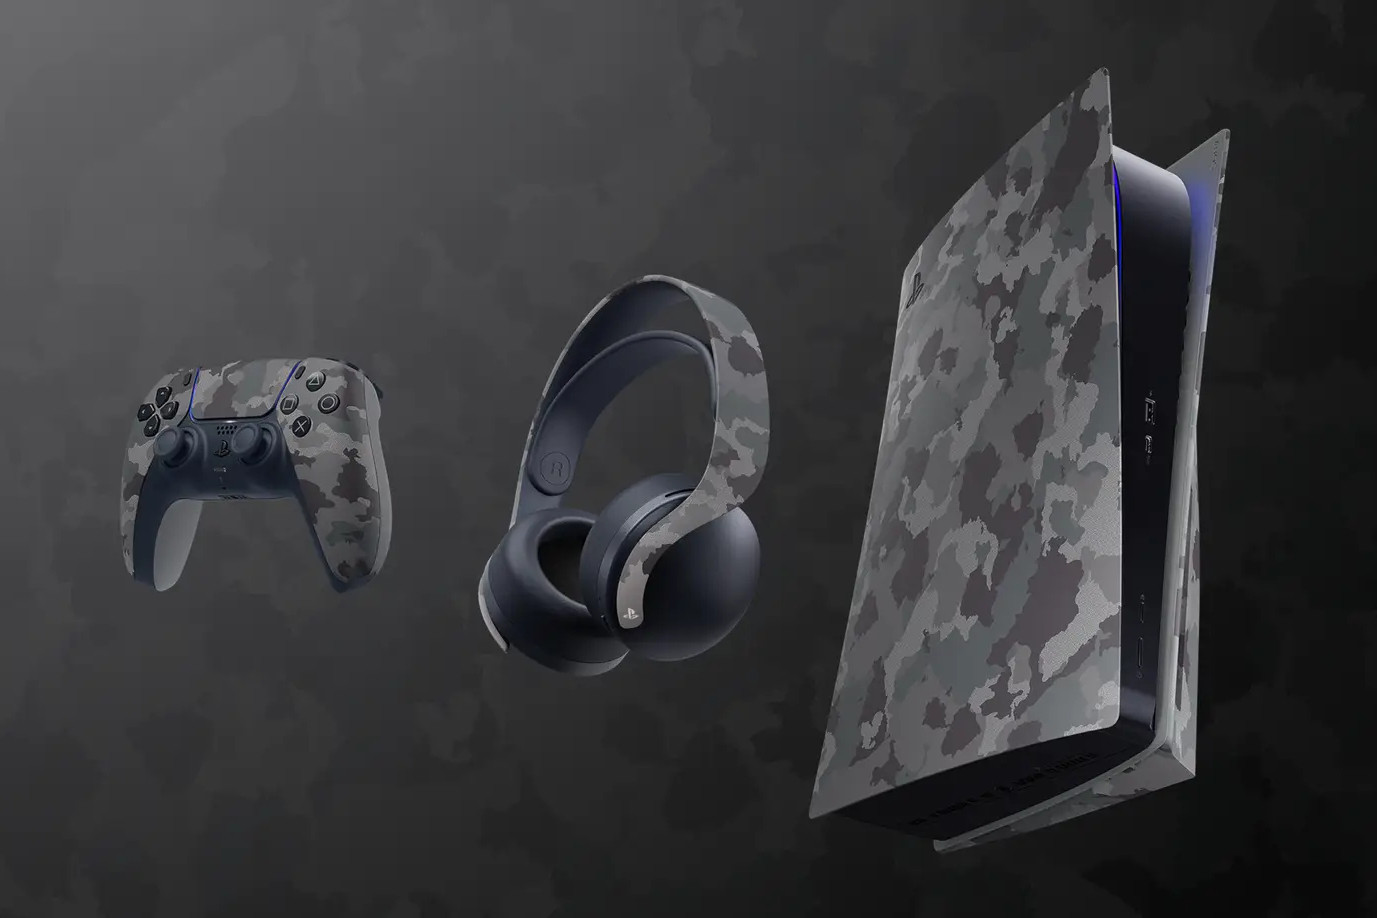 ps5-collection-gray-camouflage